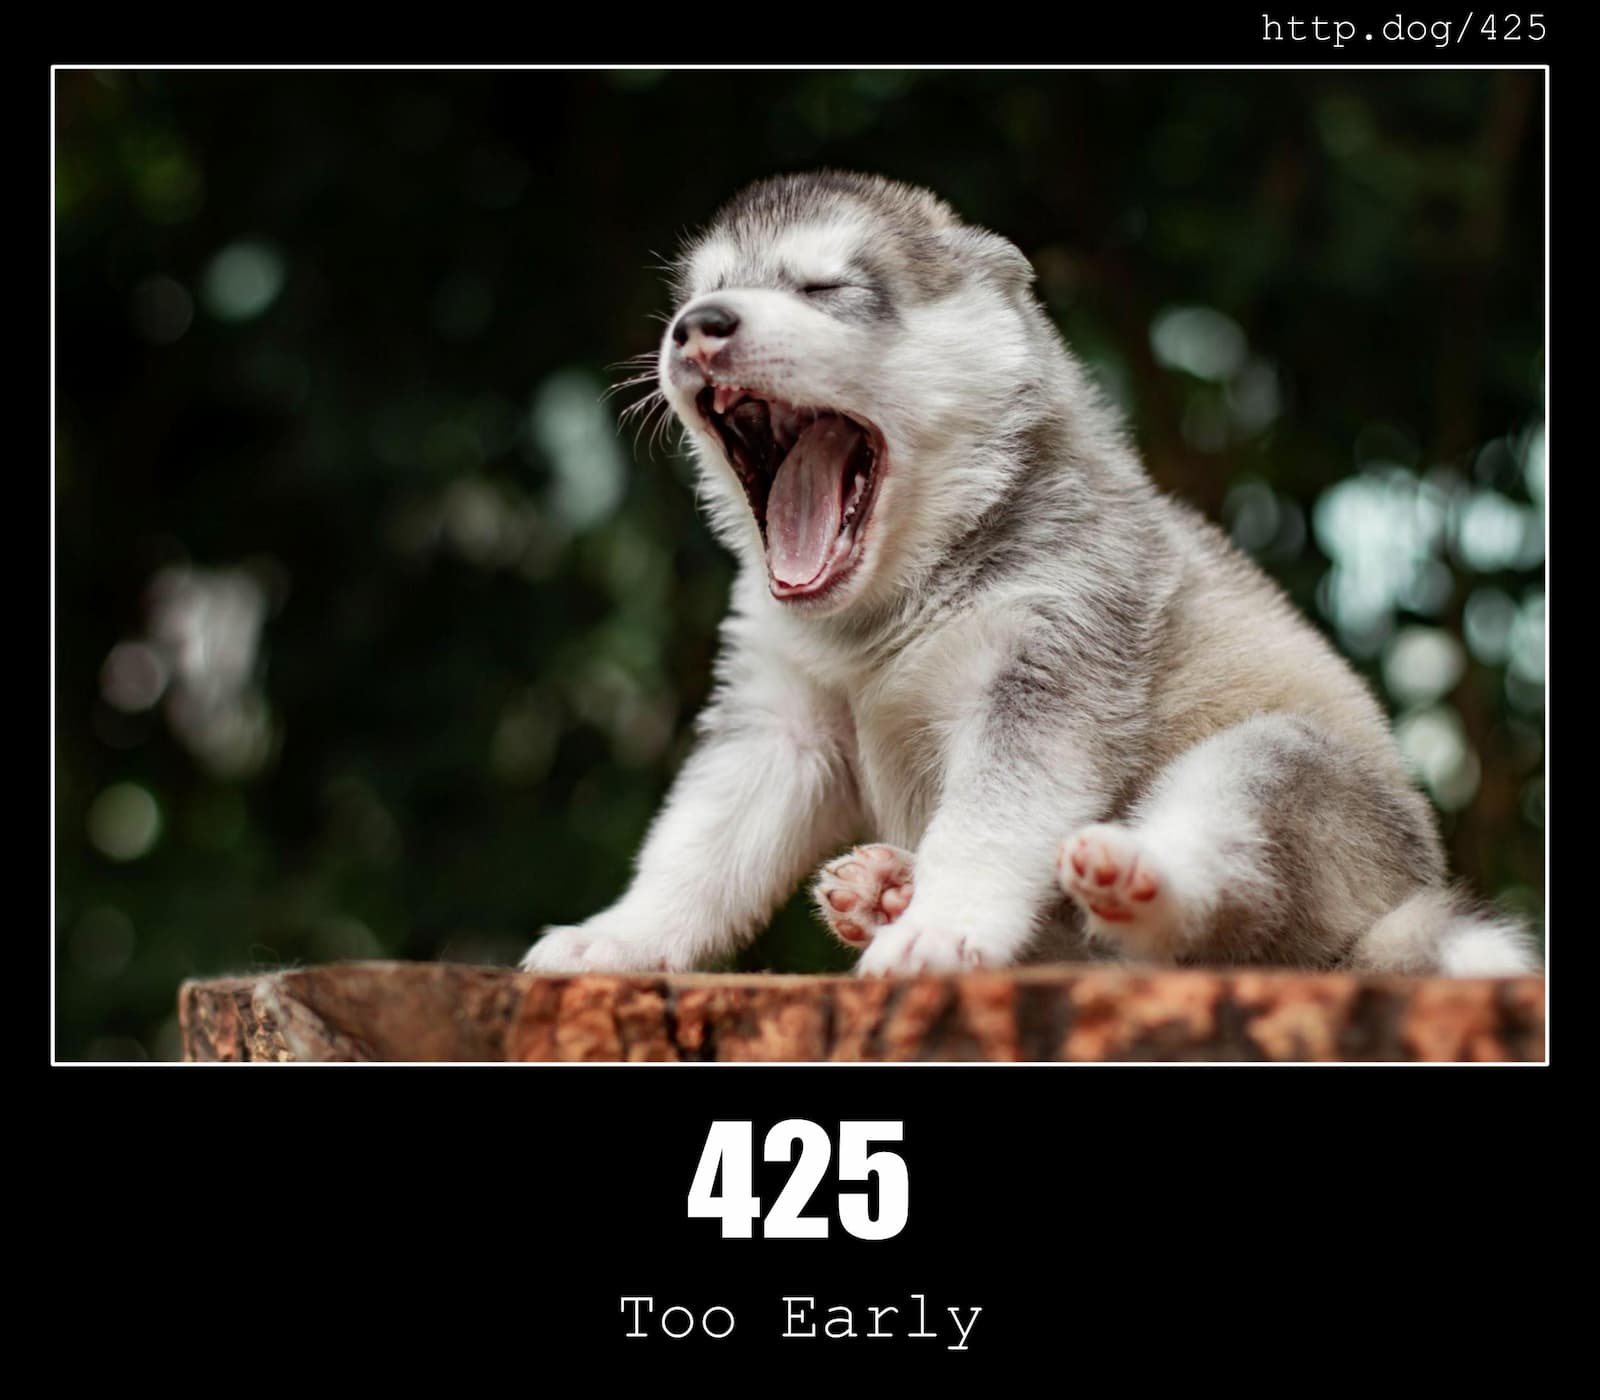 HTTP Status Code 425 Too Early & Dogs